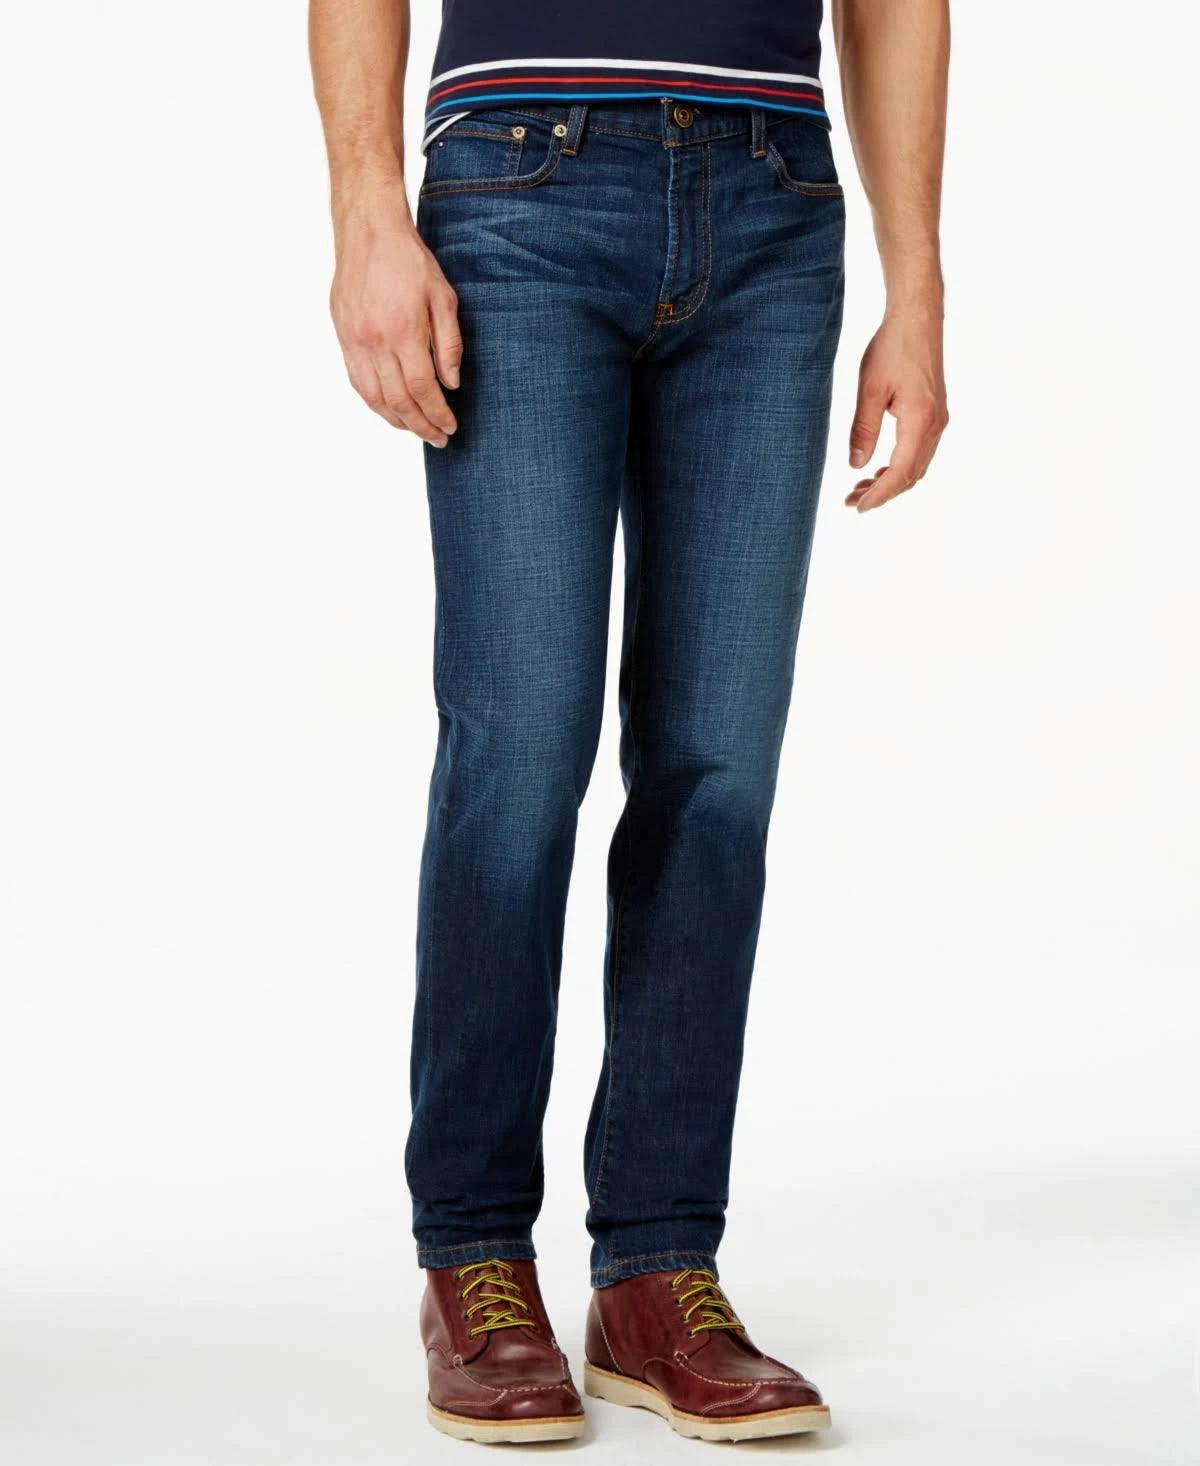 Tommy Hilfiger Men's Slim-Fit Stretch Jeans - Classic, Comfortable, and Stylish | Image